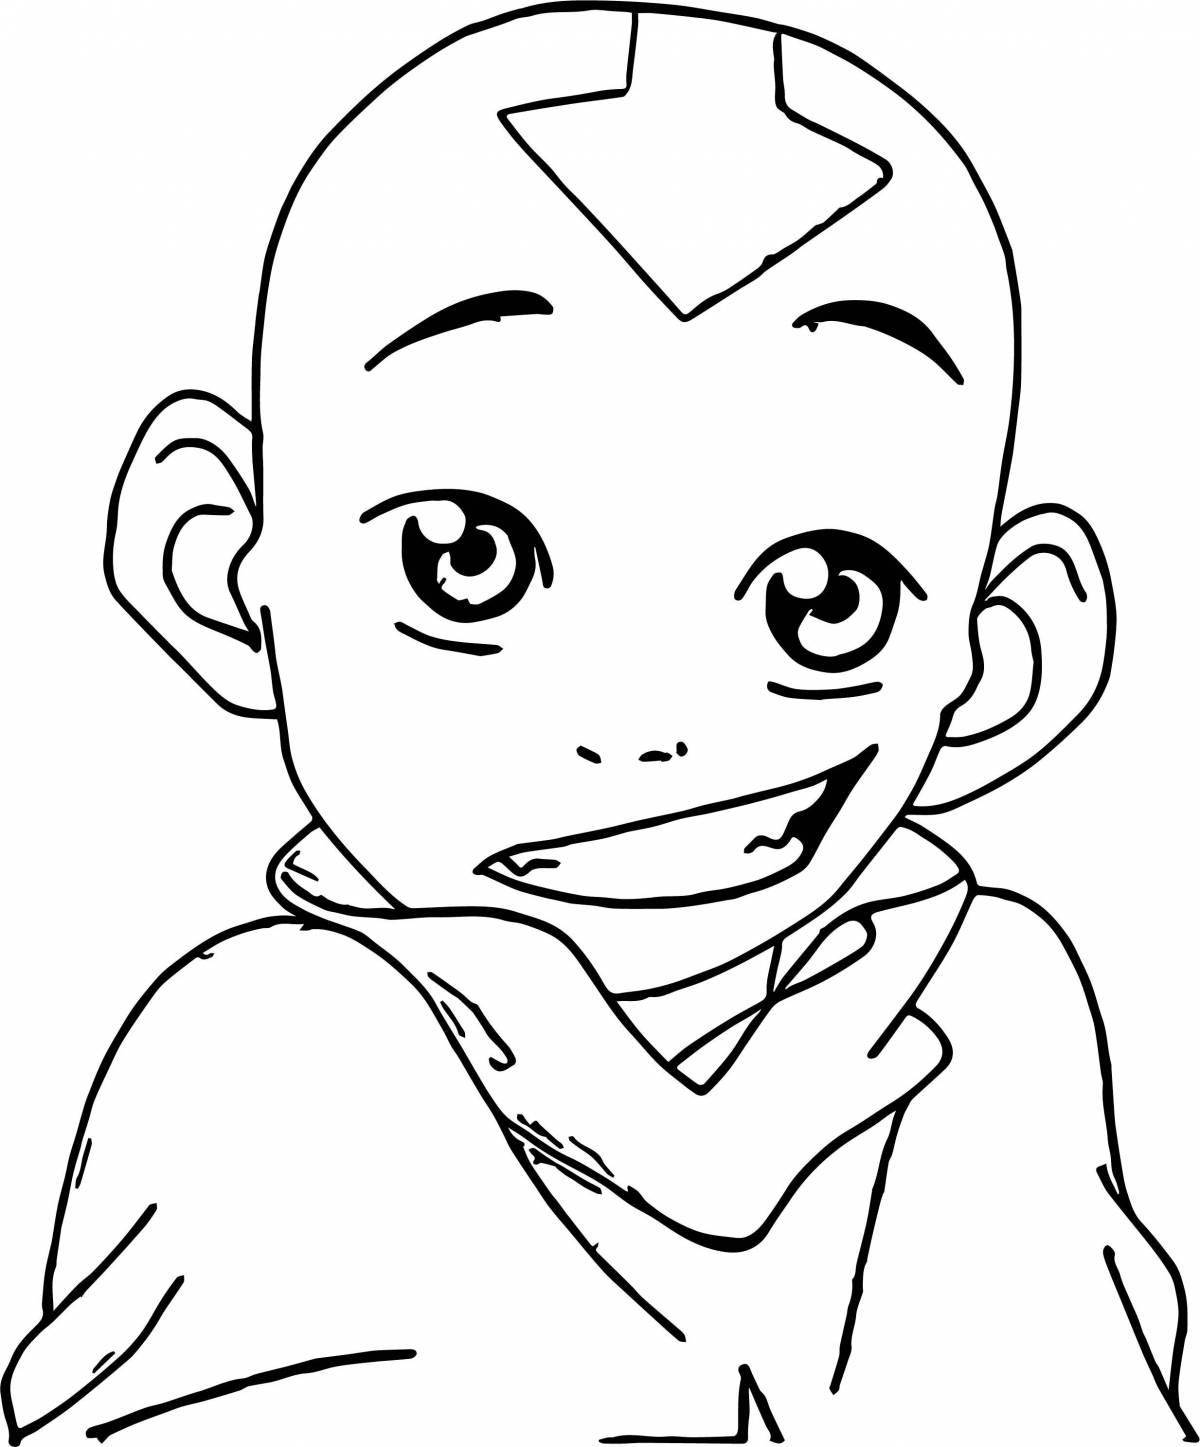 Aang's happy avatar coloring page